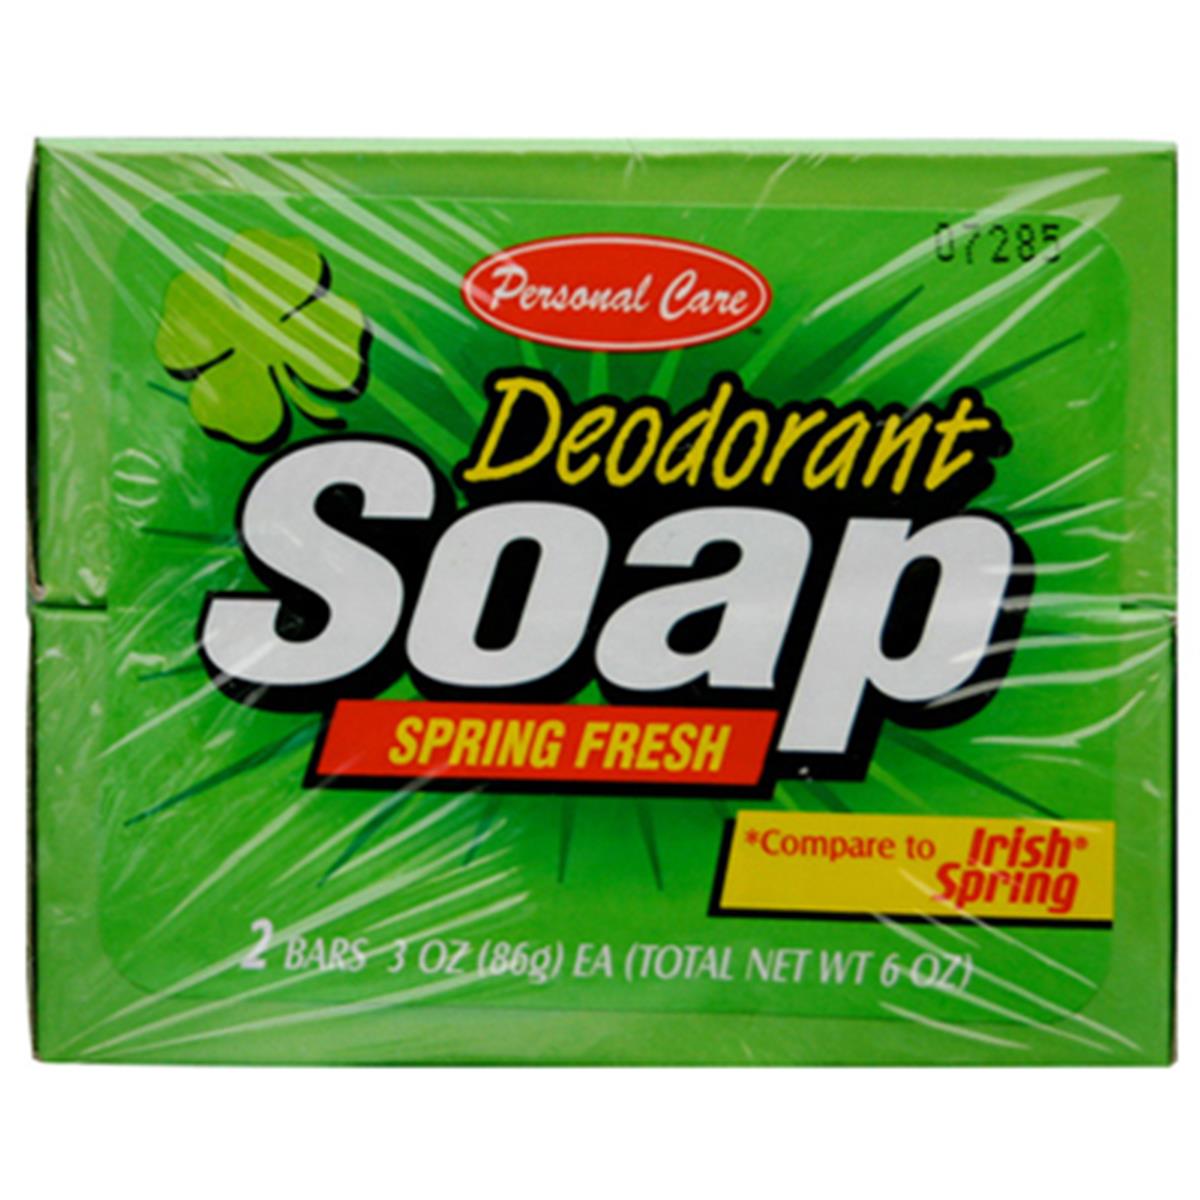 SCA Personal Care Personal Care 92078-1 Spring Fresh Deodorant Soap Bar - 3 oz., 2 Pack, Pack of 12 - green - Size: One Size